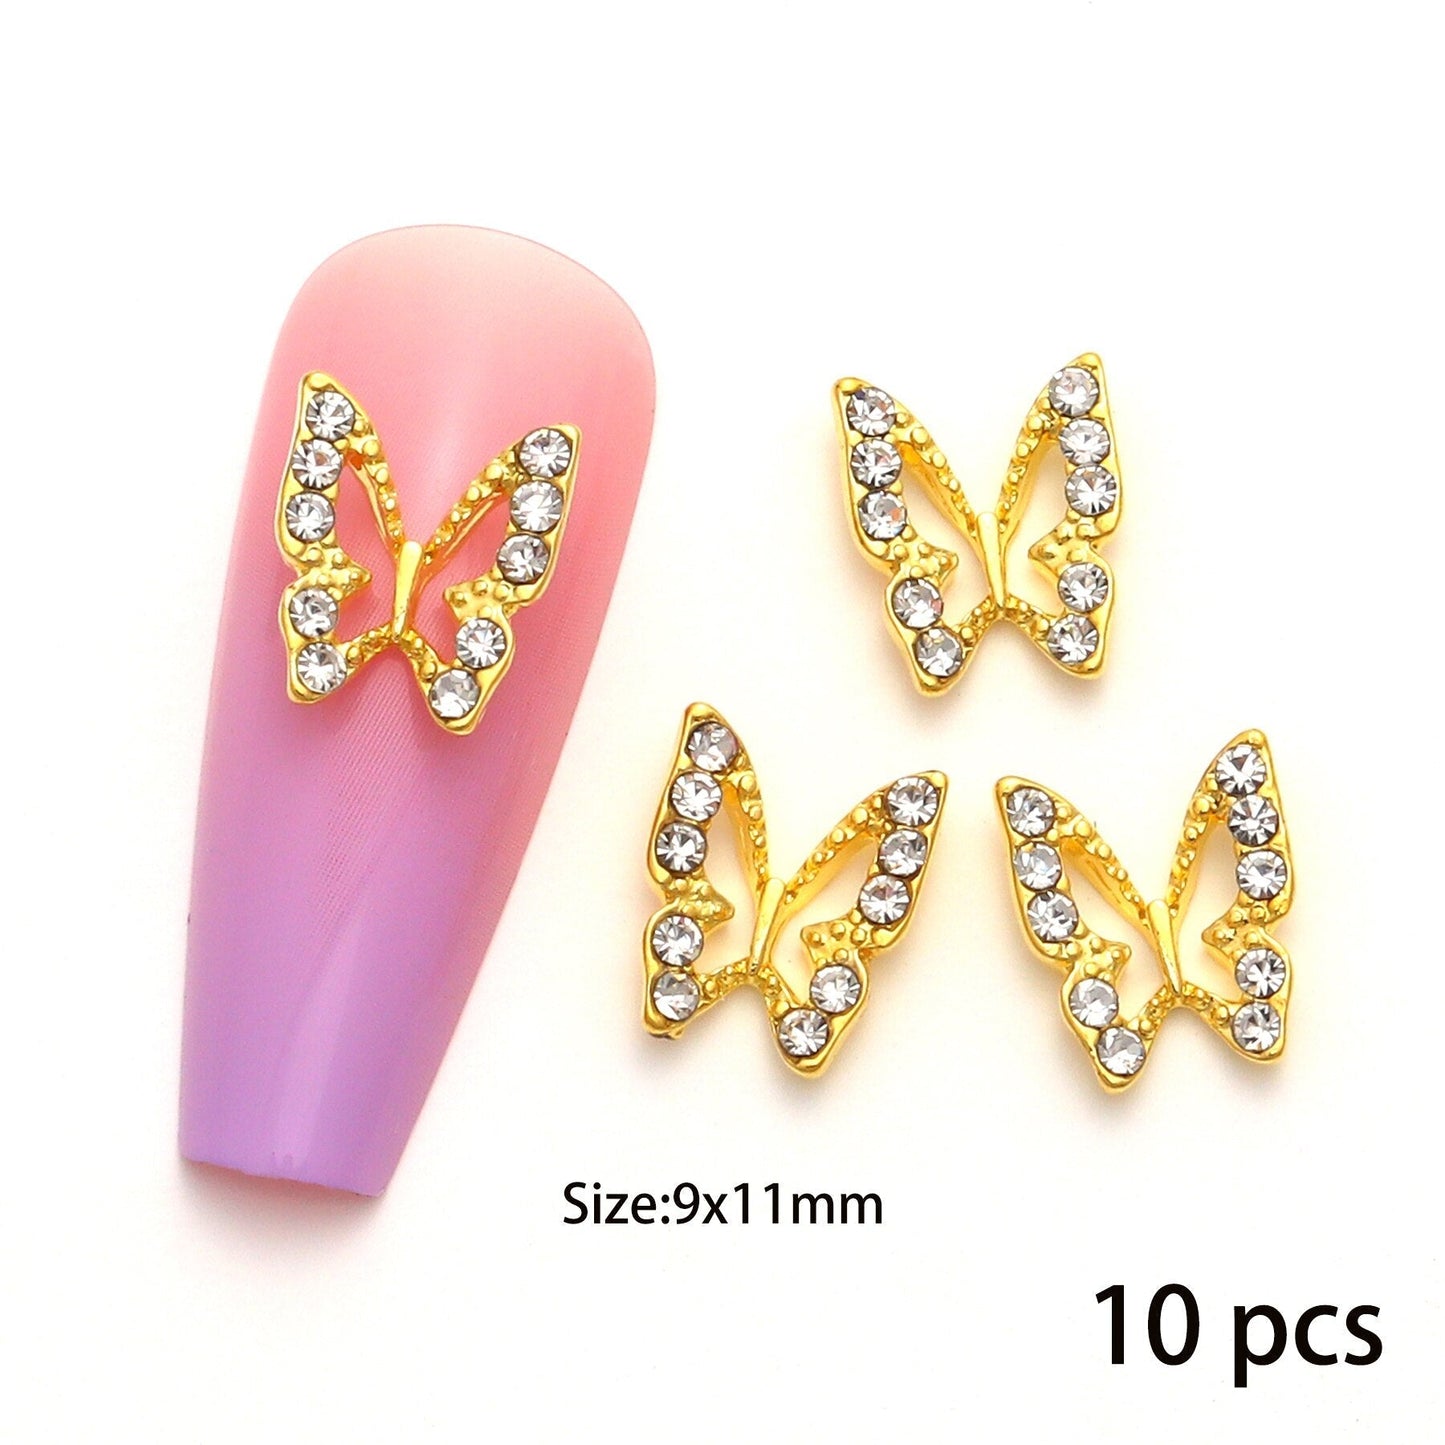 10 Pcs/pack Butterfly Alloy Nail Charms 3D Butterfly Zircon Diamond Rhinestone Nails Jewelry DIY Nail Art Decoration Accessories